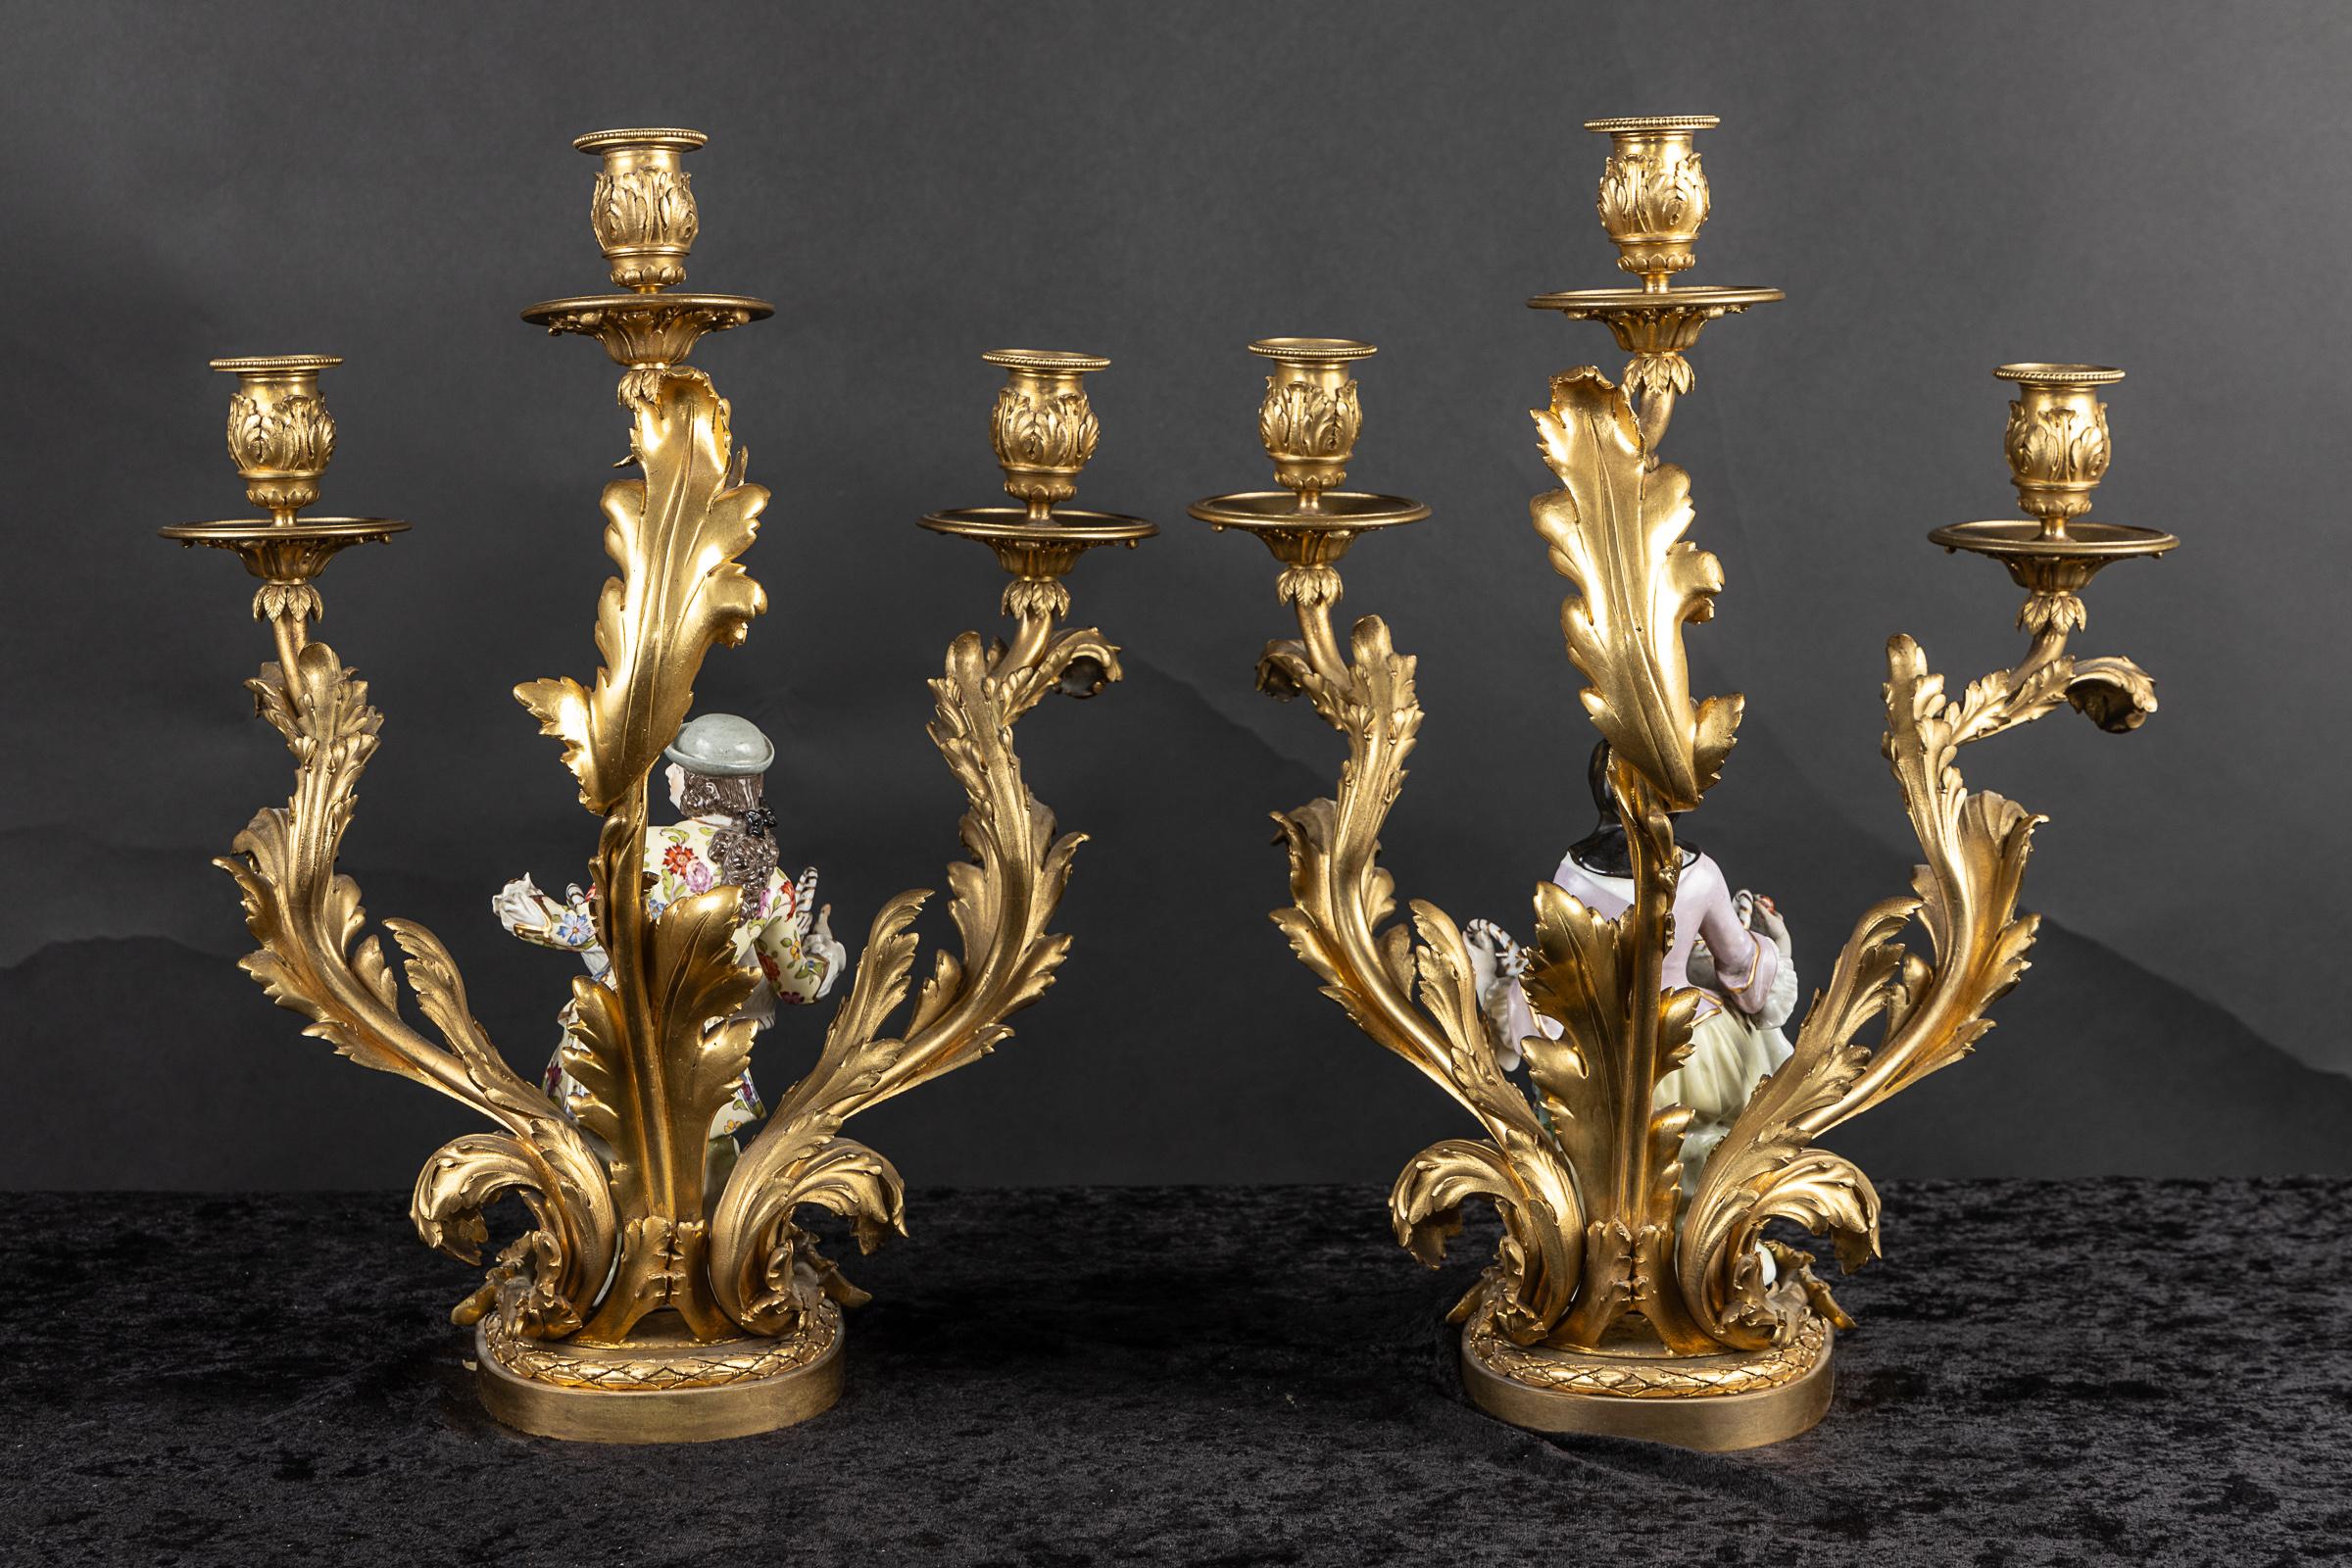 Gorgeous pair of French 19th century three-light bronze d’ore` candelabra with Meissen porcelain man on one, lady on the other: each modeled standing holding a handled basket. Each porcelain features features floriate details and rests on a bronze